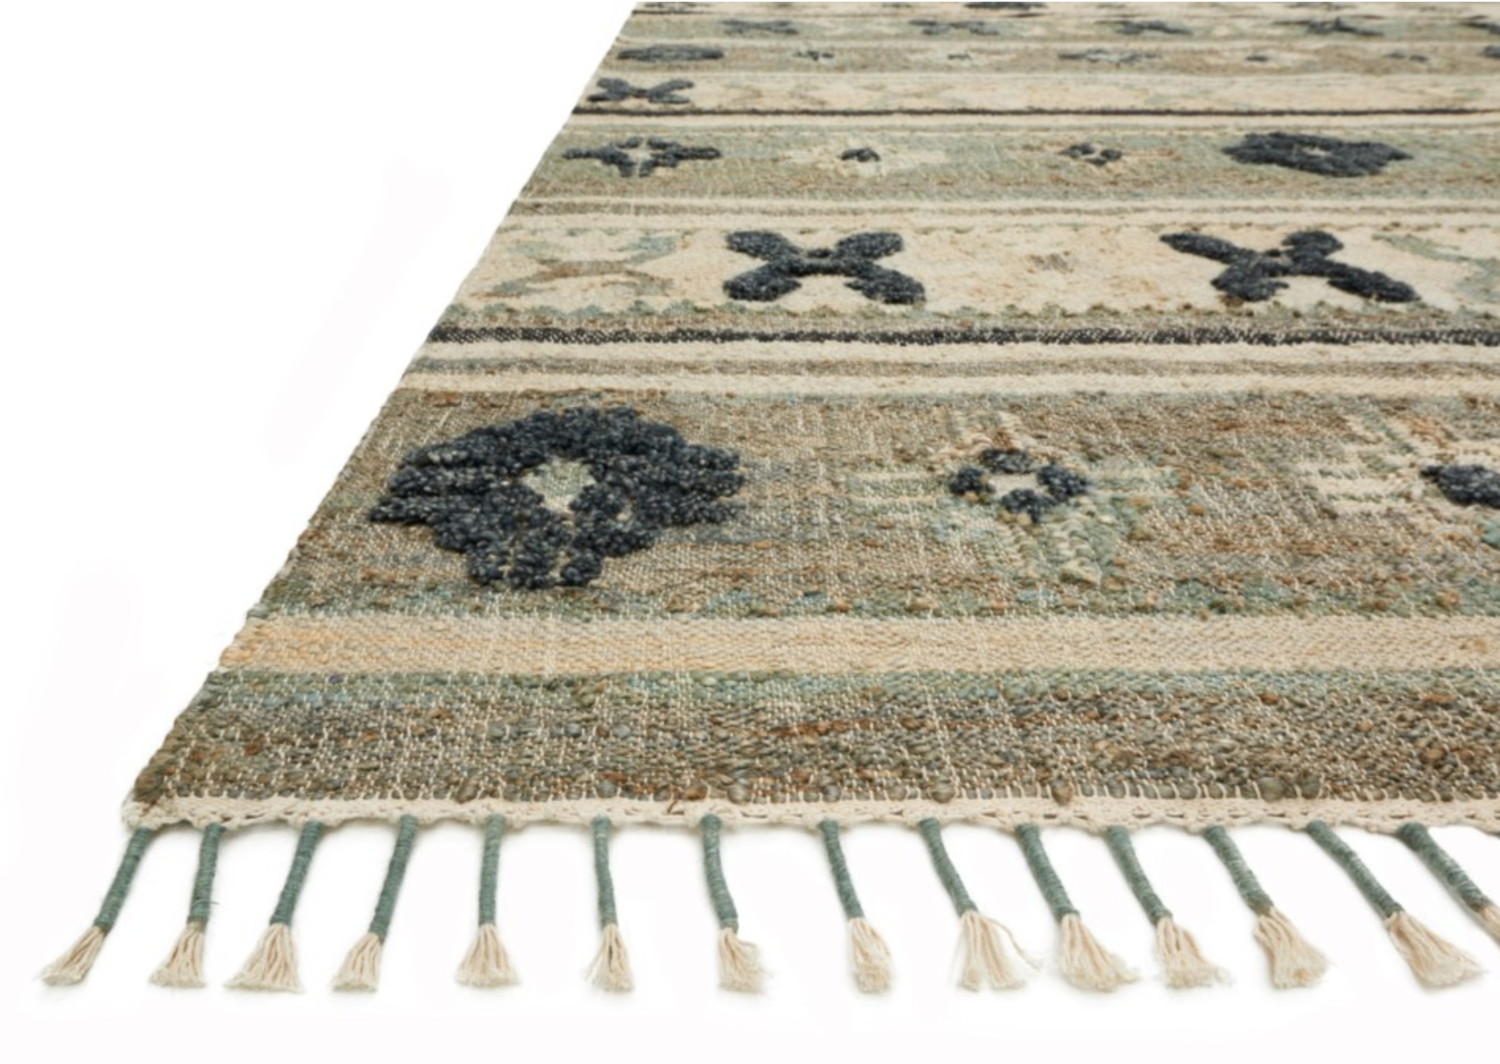 Favorite Things: Rugs from Dallas